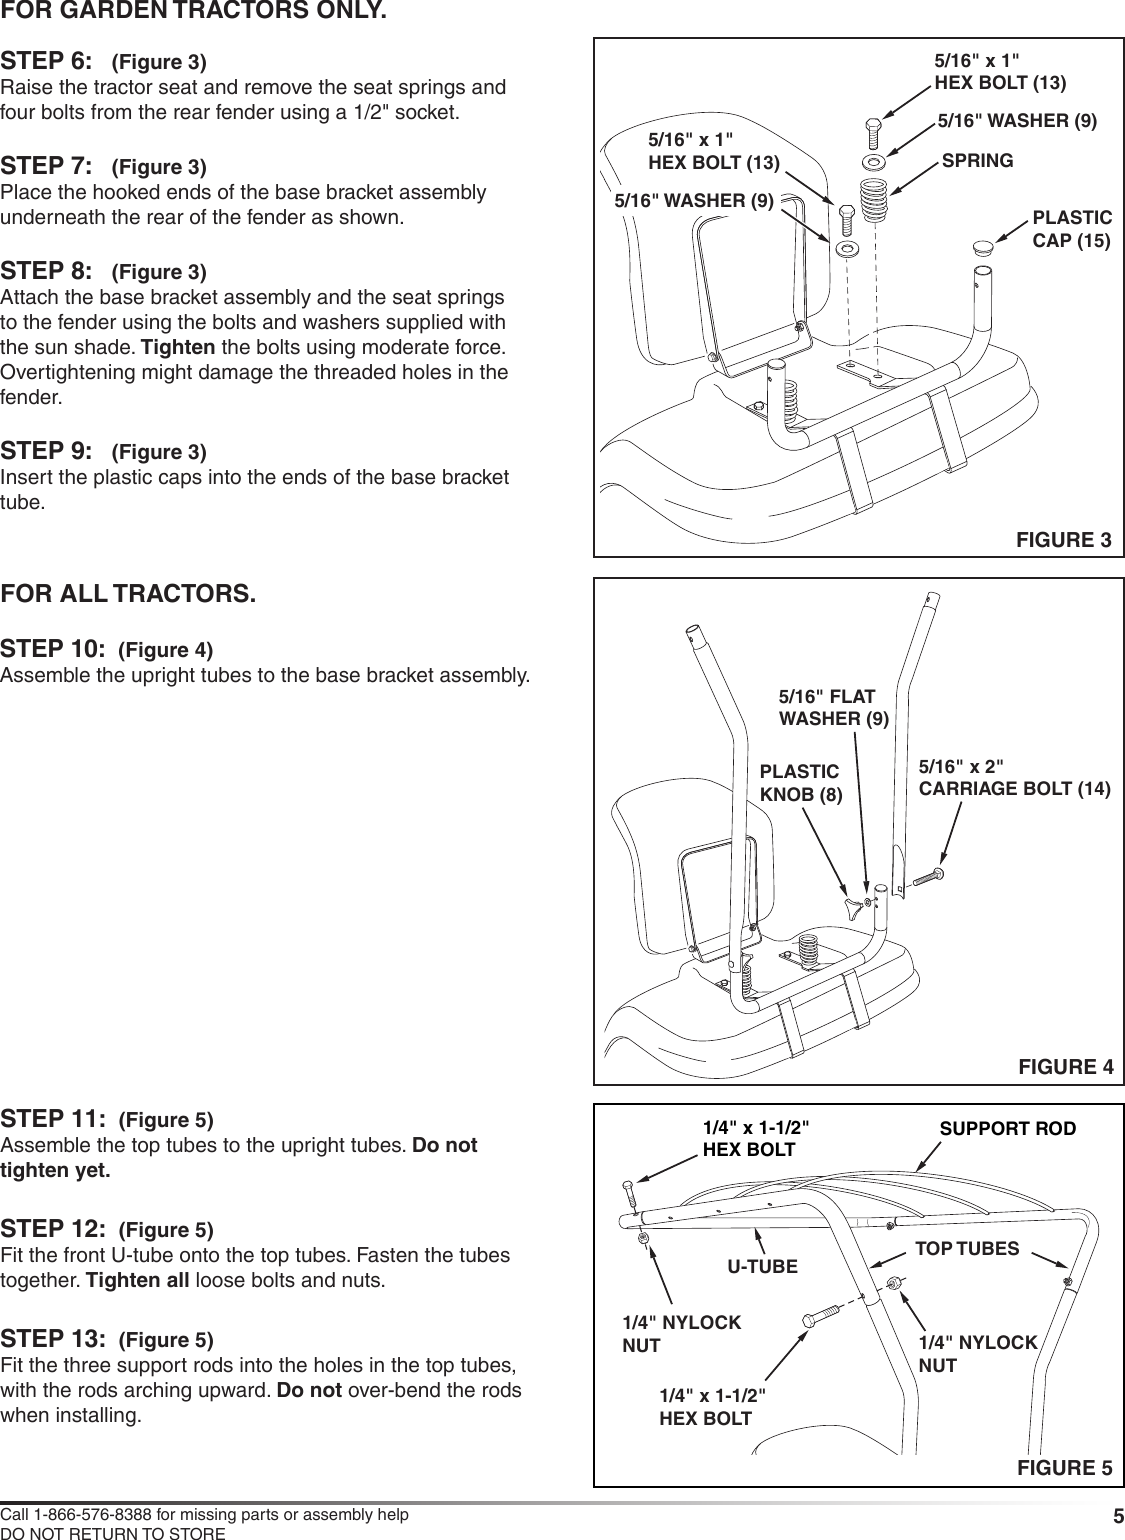 Page 5 of 8 - Craftsman Craftsman-Deluxe-Sun-Shade-For-Tractors-Owners-Manual-  Craftsman-deluxe-sun-shade-for-tractors-owners-manual